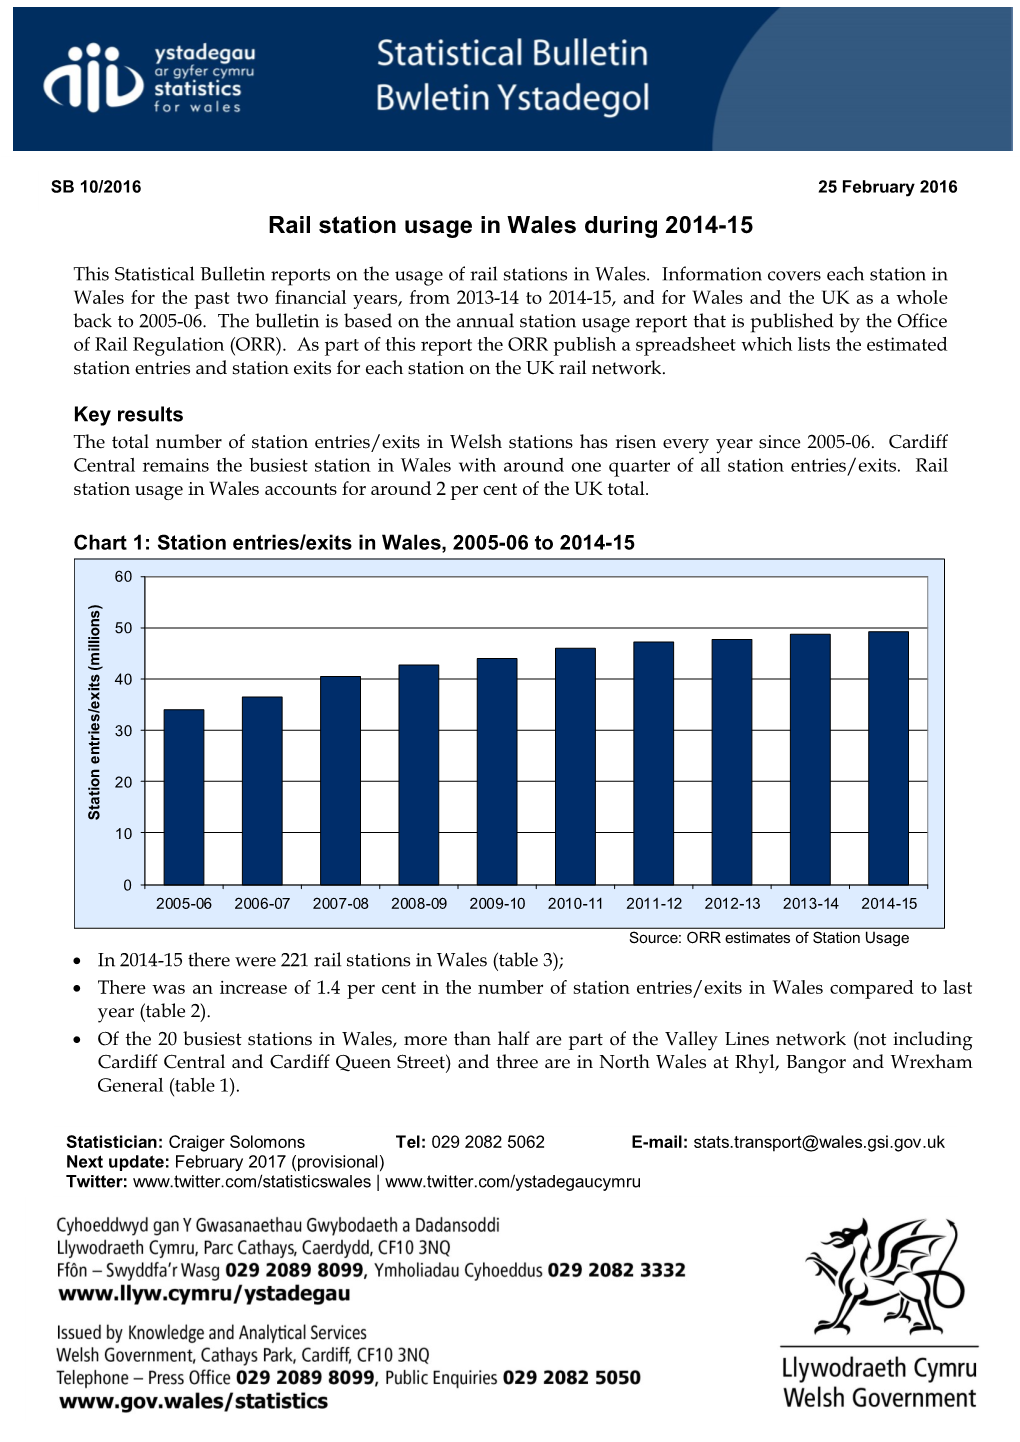 Rail Station Usage in Wales During 2014-15